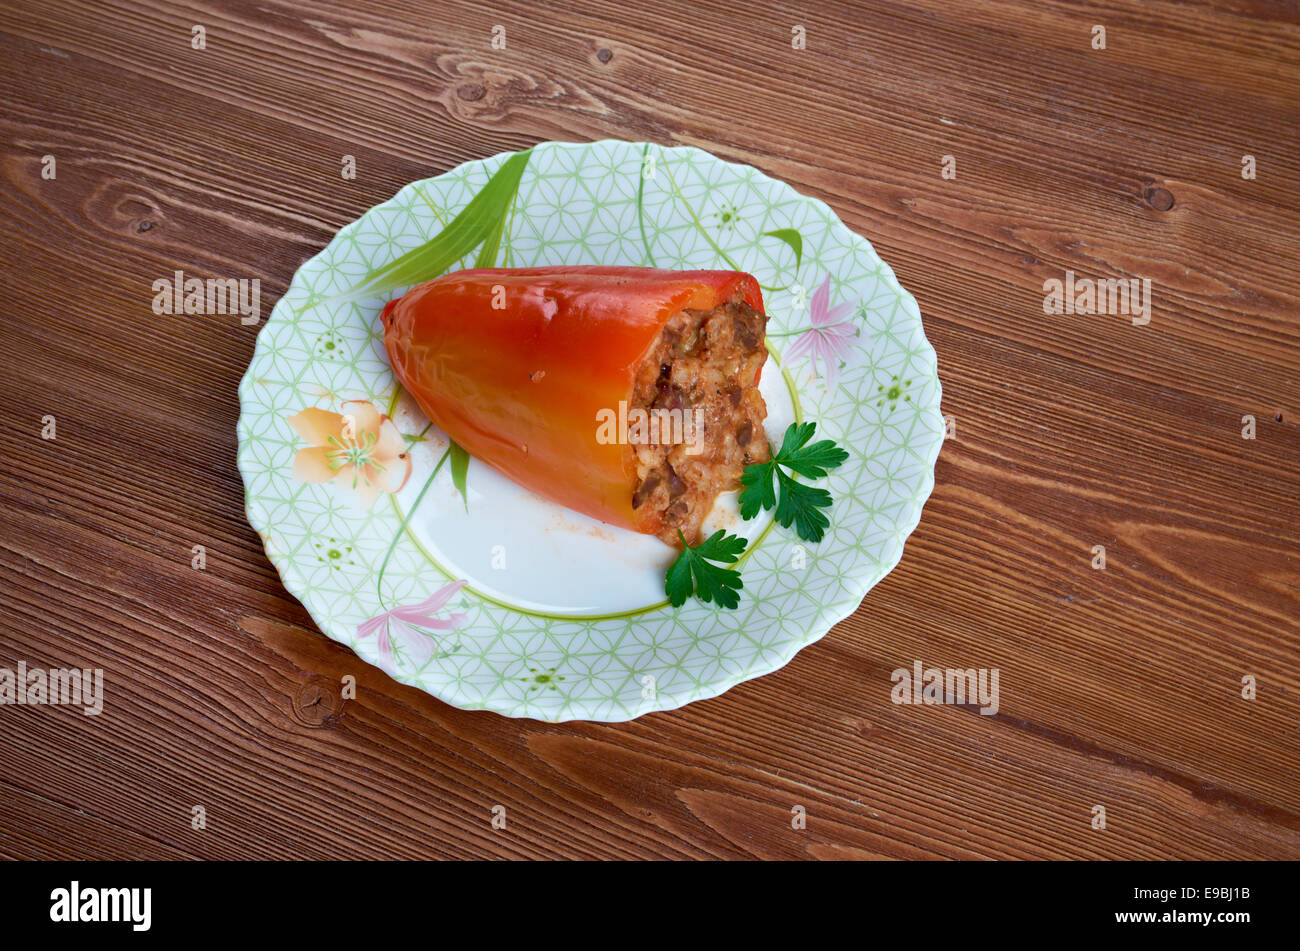 Stuffed paprika with liver, pork, rice and vegetables.Balkan cuisine Stock Photo